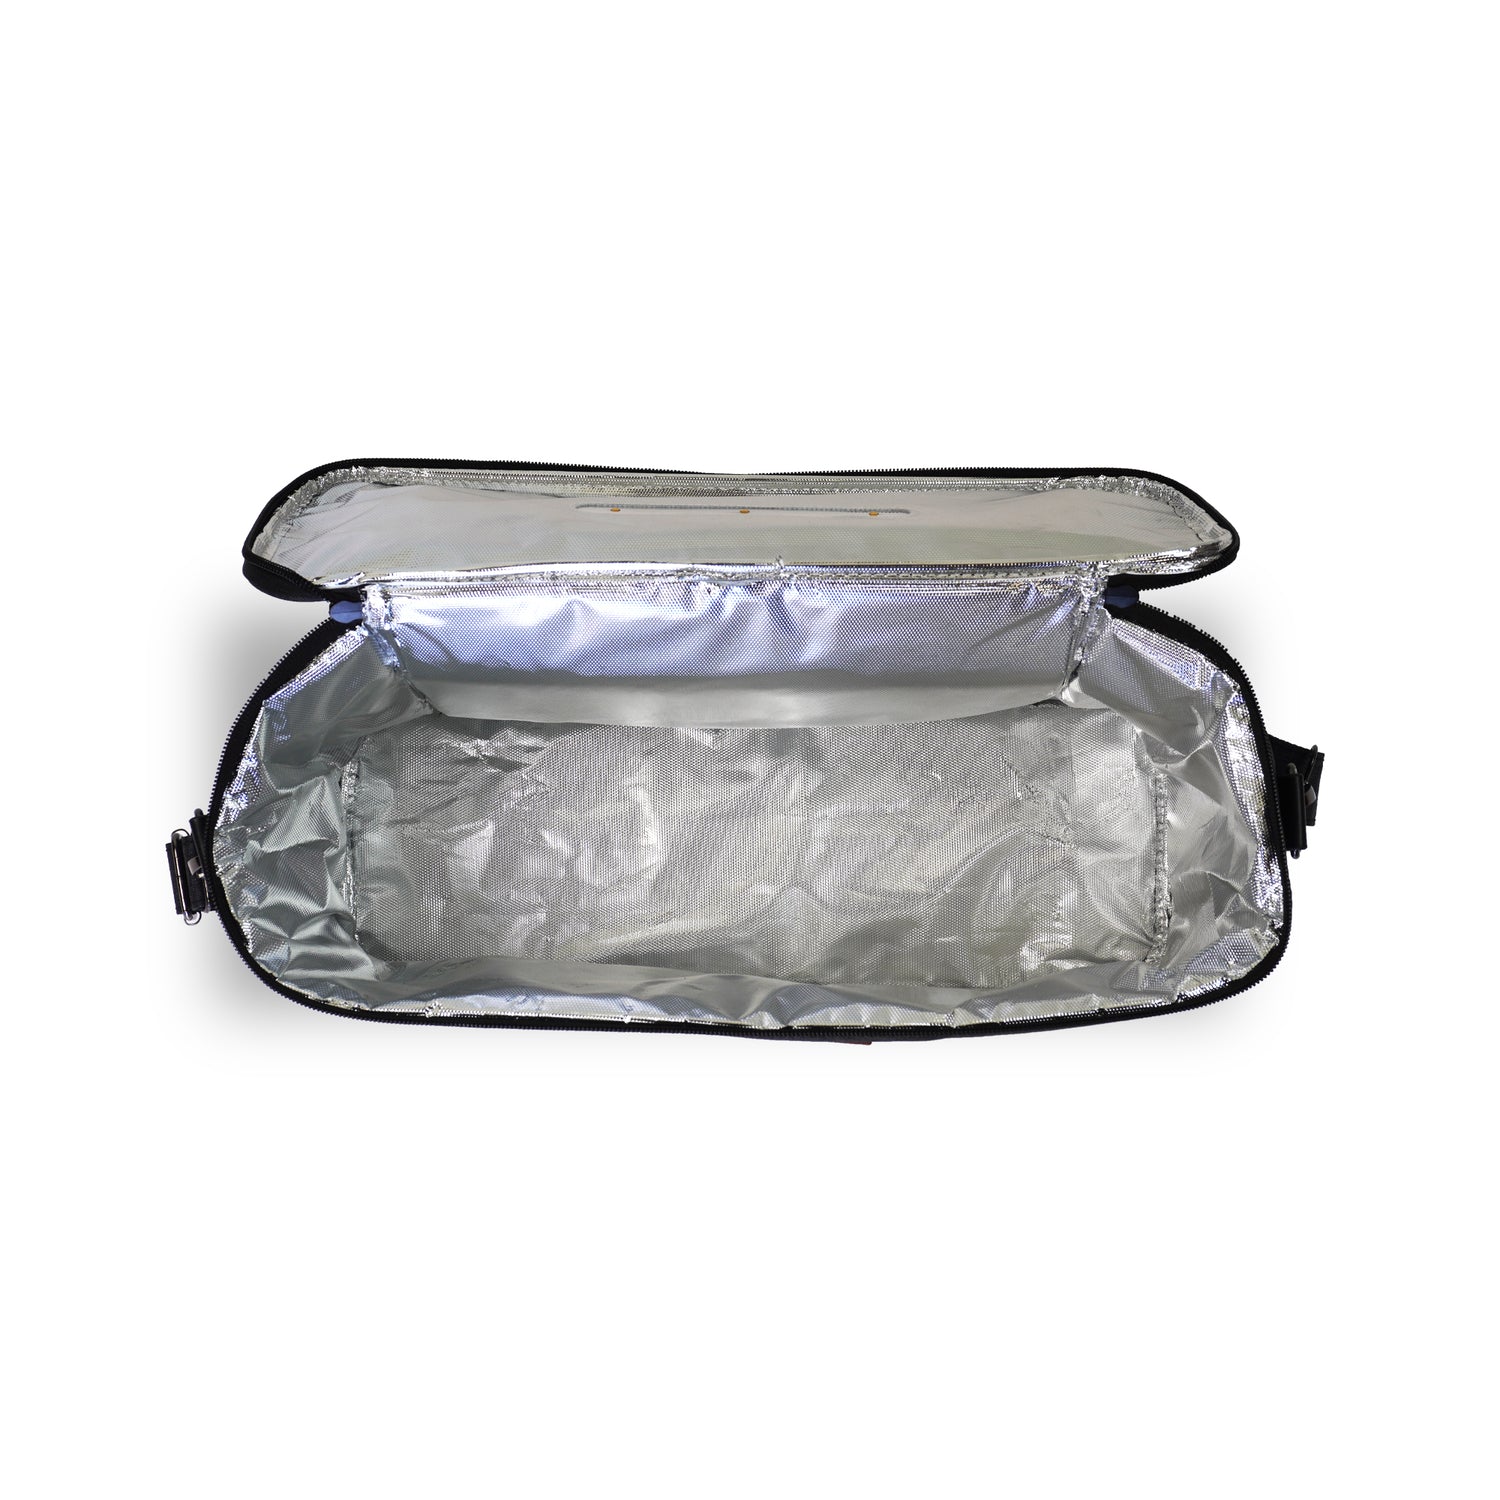 2-in-1 Cooler Bag with UV Light Sterilization - Open - Top